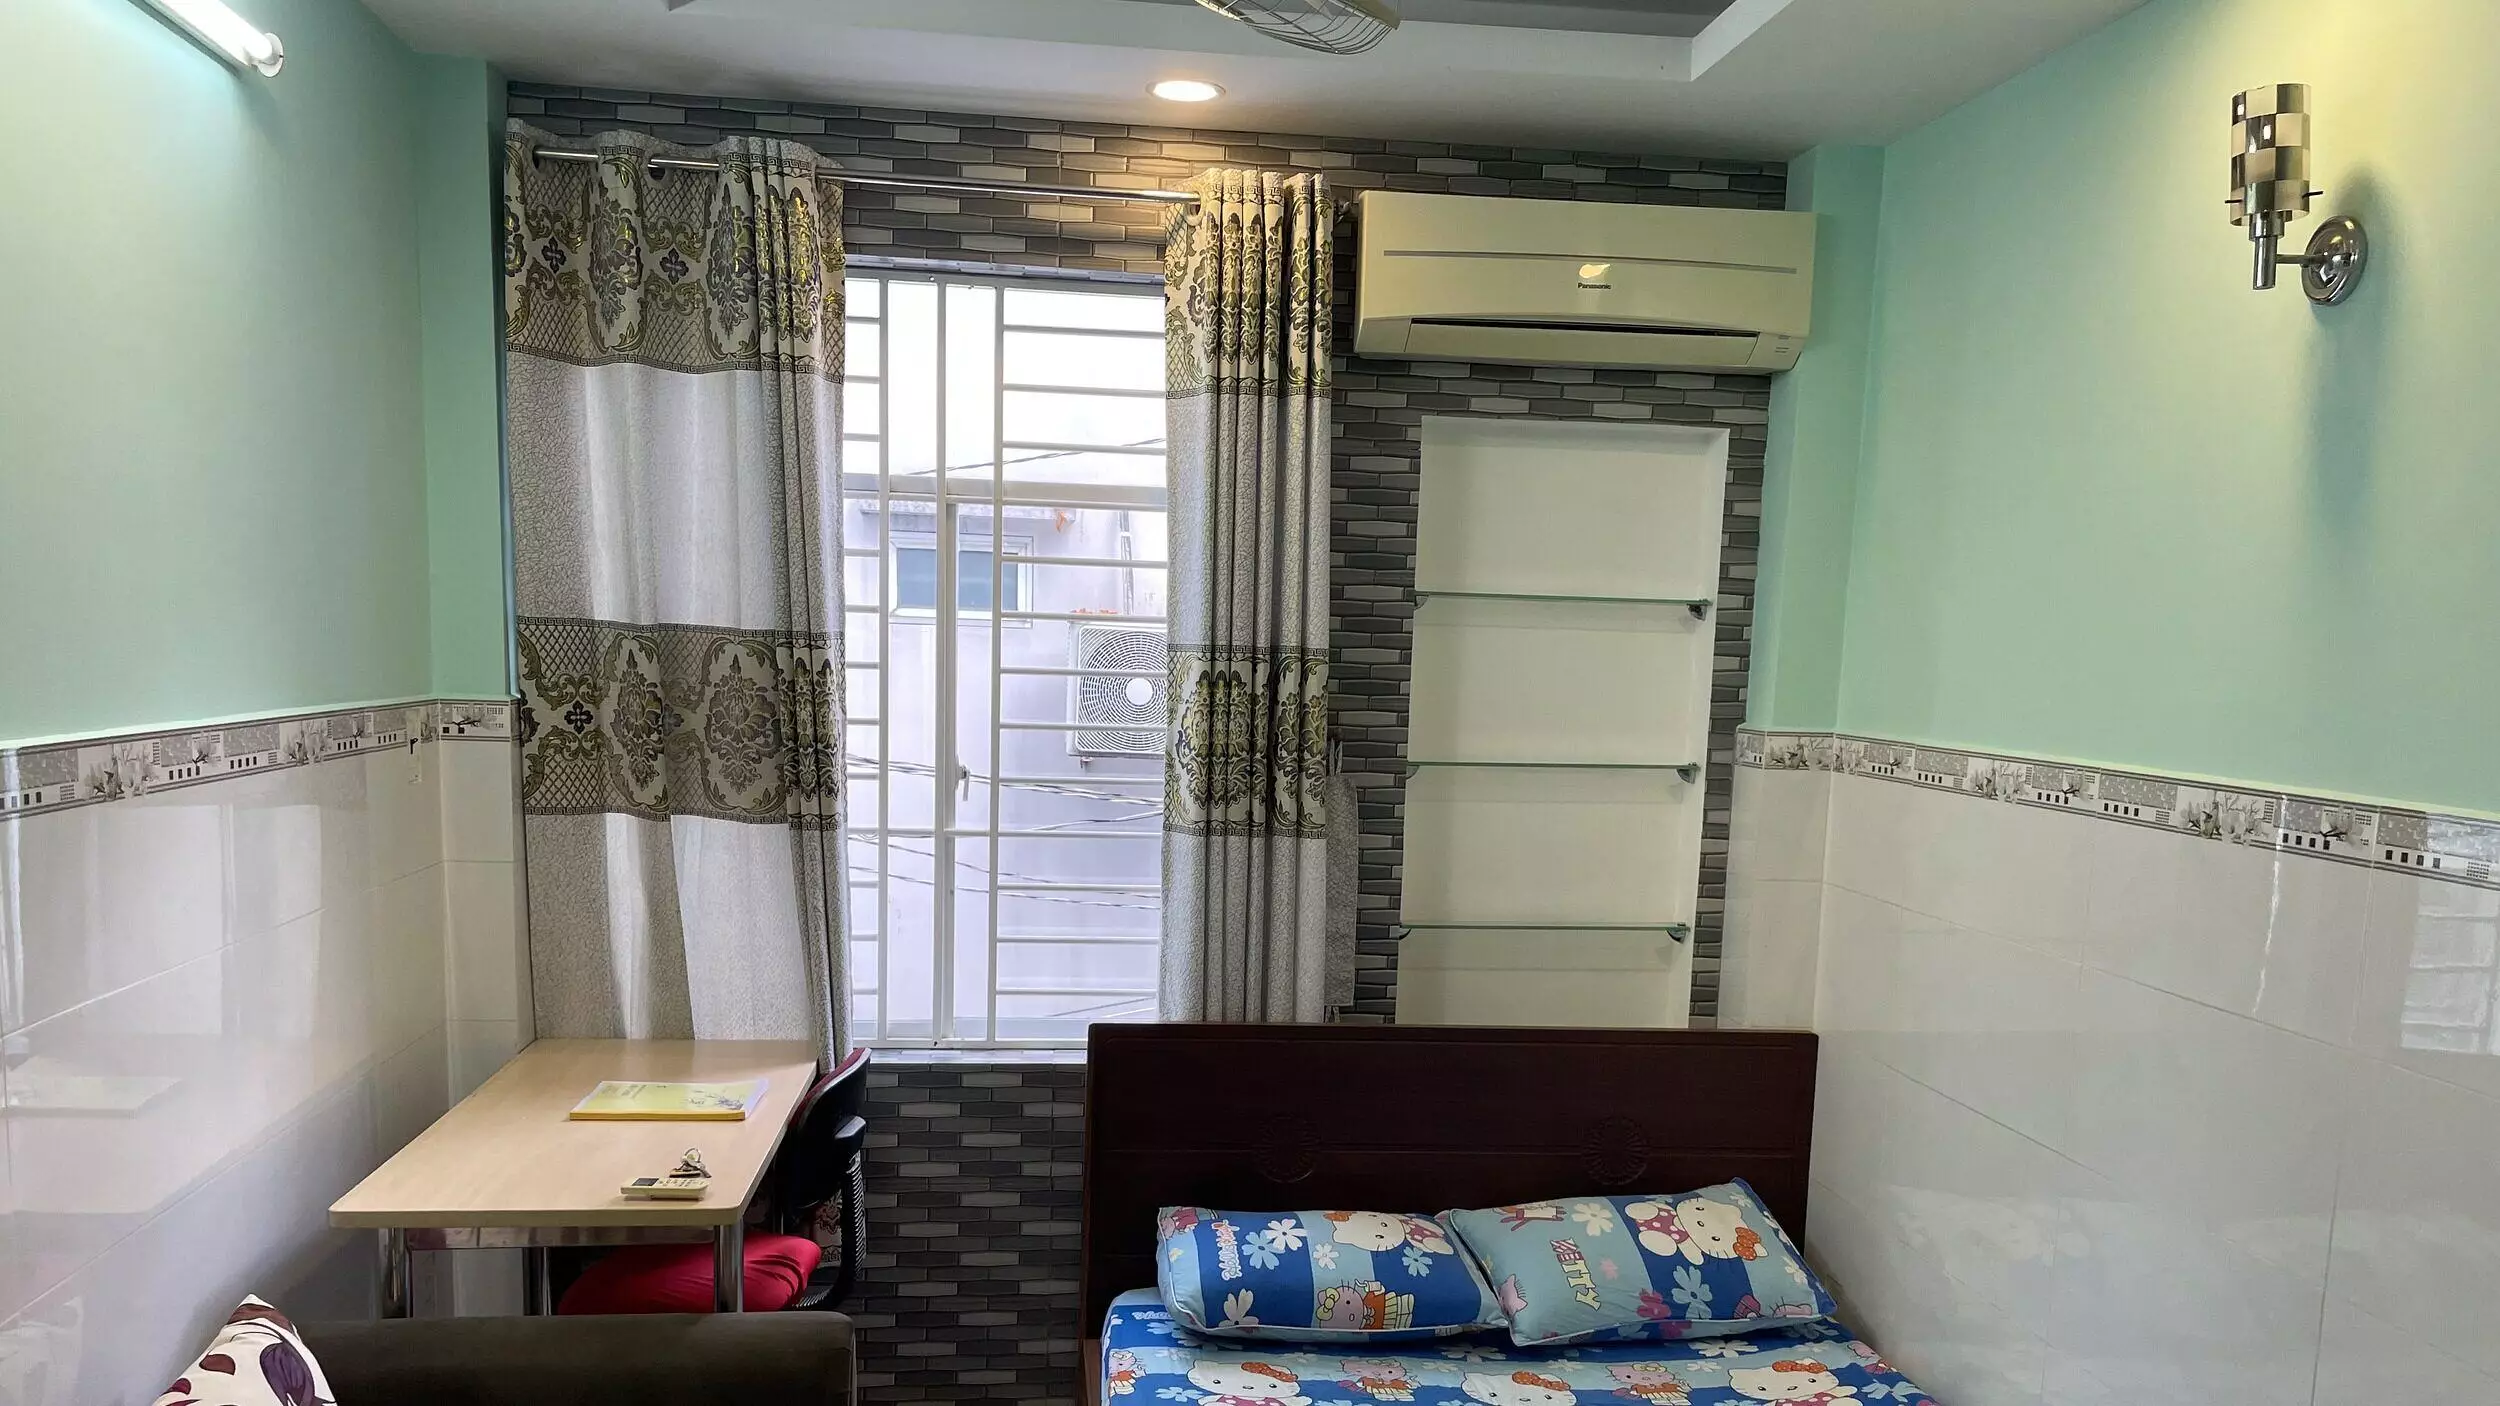 Picture of a room in an affordable Vietnam accommodation